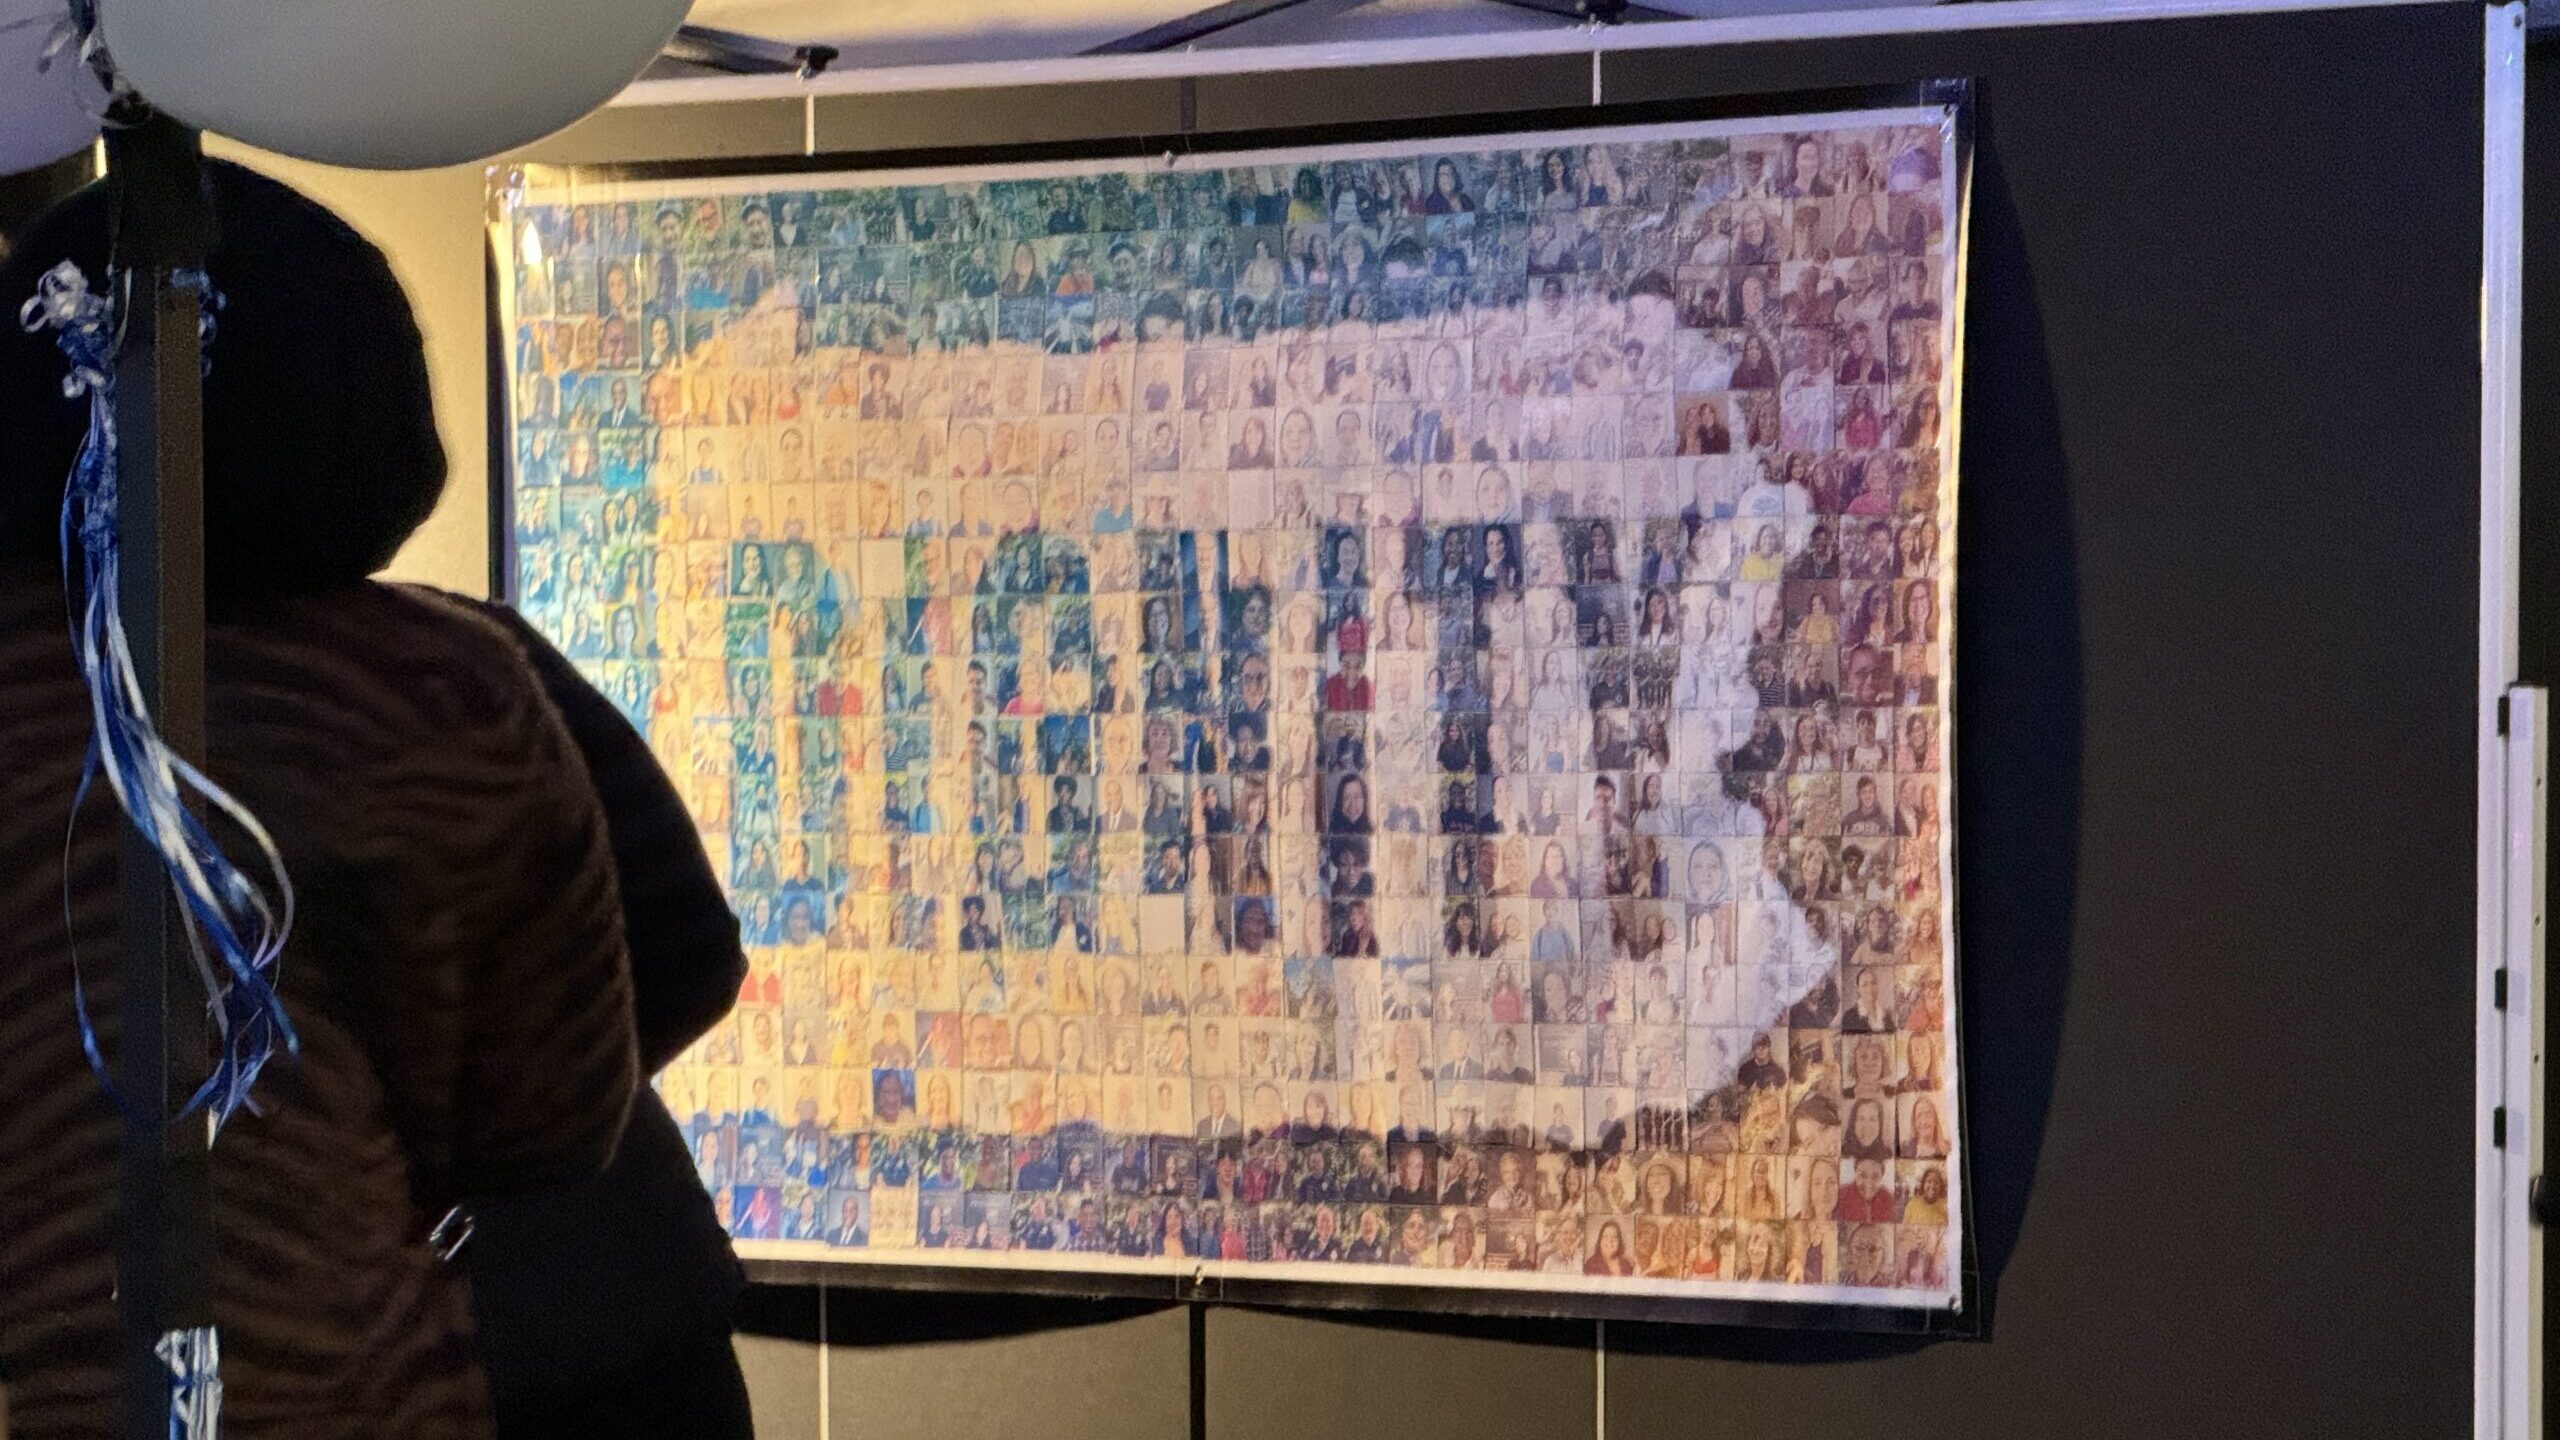 A mosaic image created by the faces of hundreds of individuals from Pennsylvania and beyond that have pledged to embrace the dignity of others. The mosaic tiles combine to form the outline of Pennsylvania and the word "Dignity."